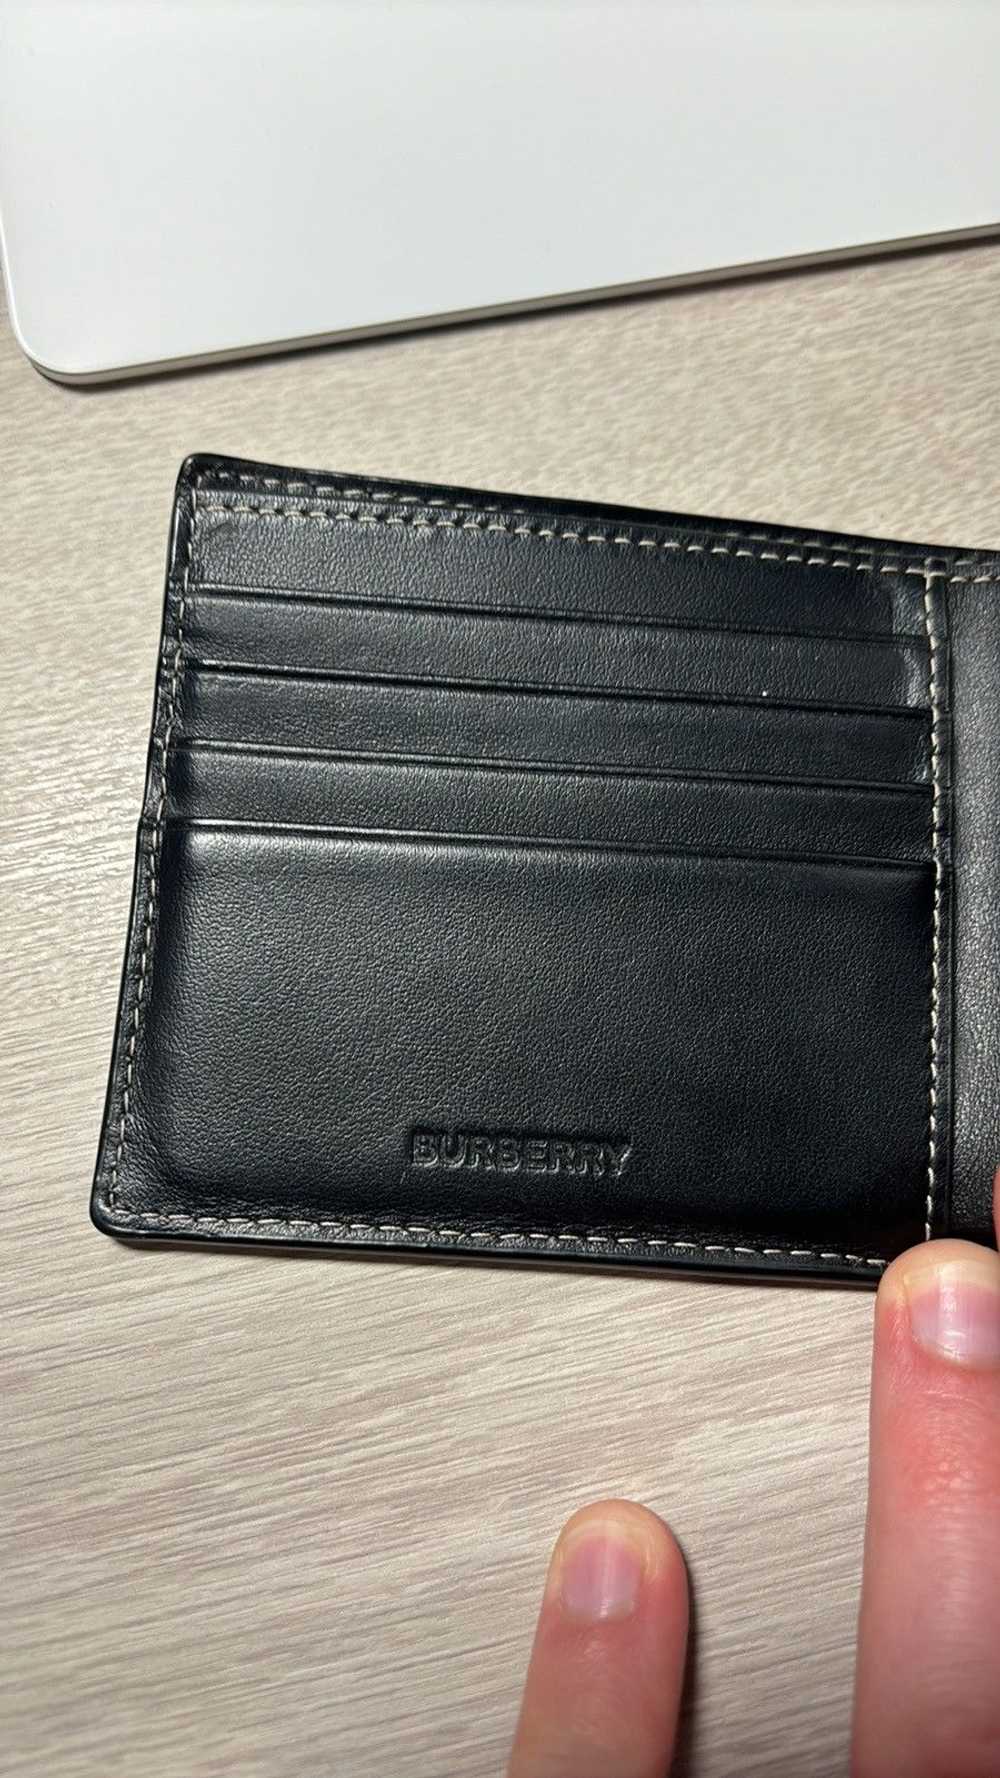 Burberry Check Leather Wallet - image 2